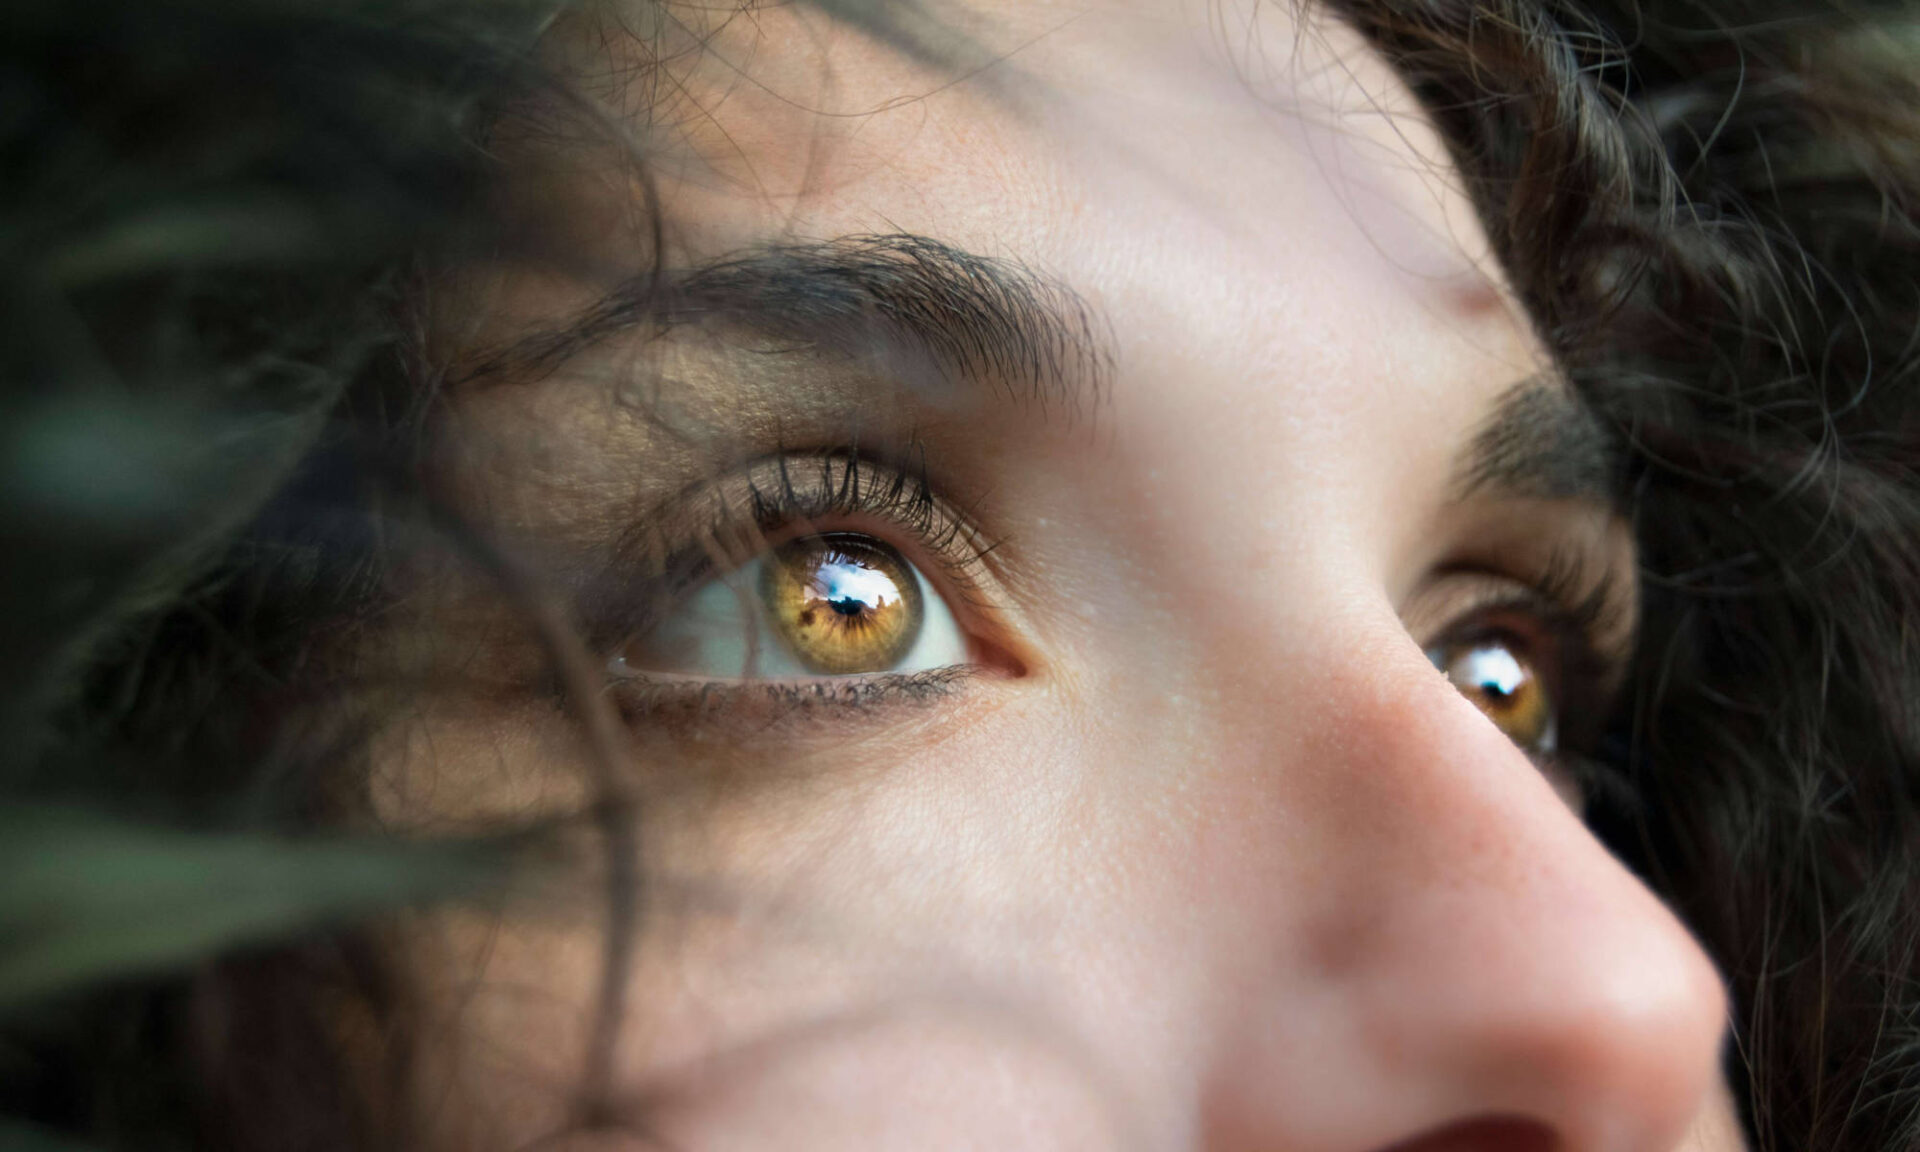 Close up of a woman's eyes and mid-face looking off camera to illustrate why eye blinking is important in humans